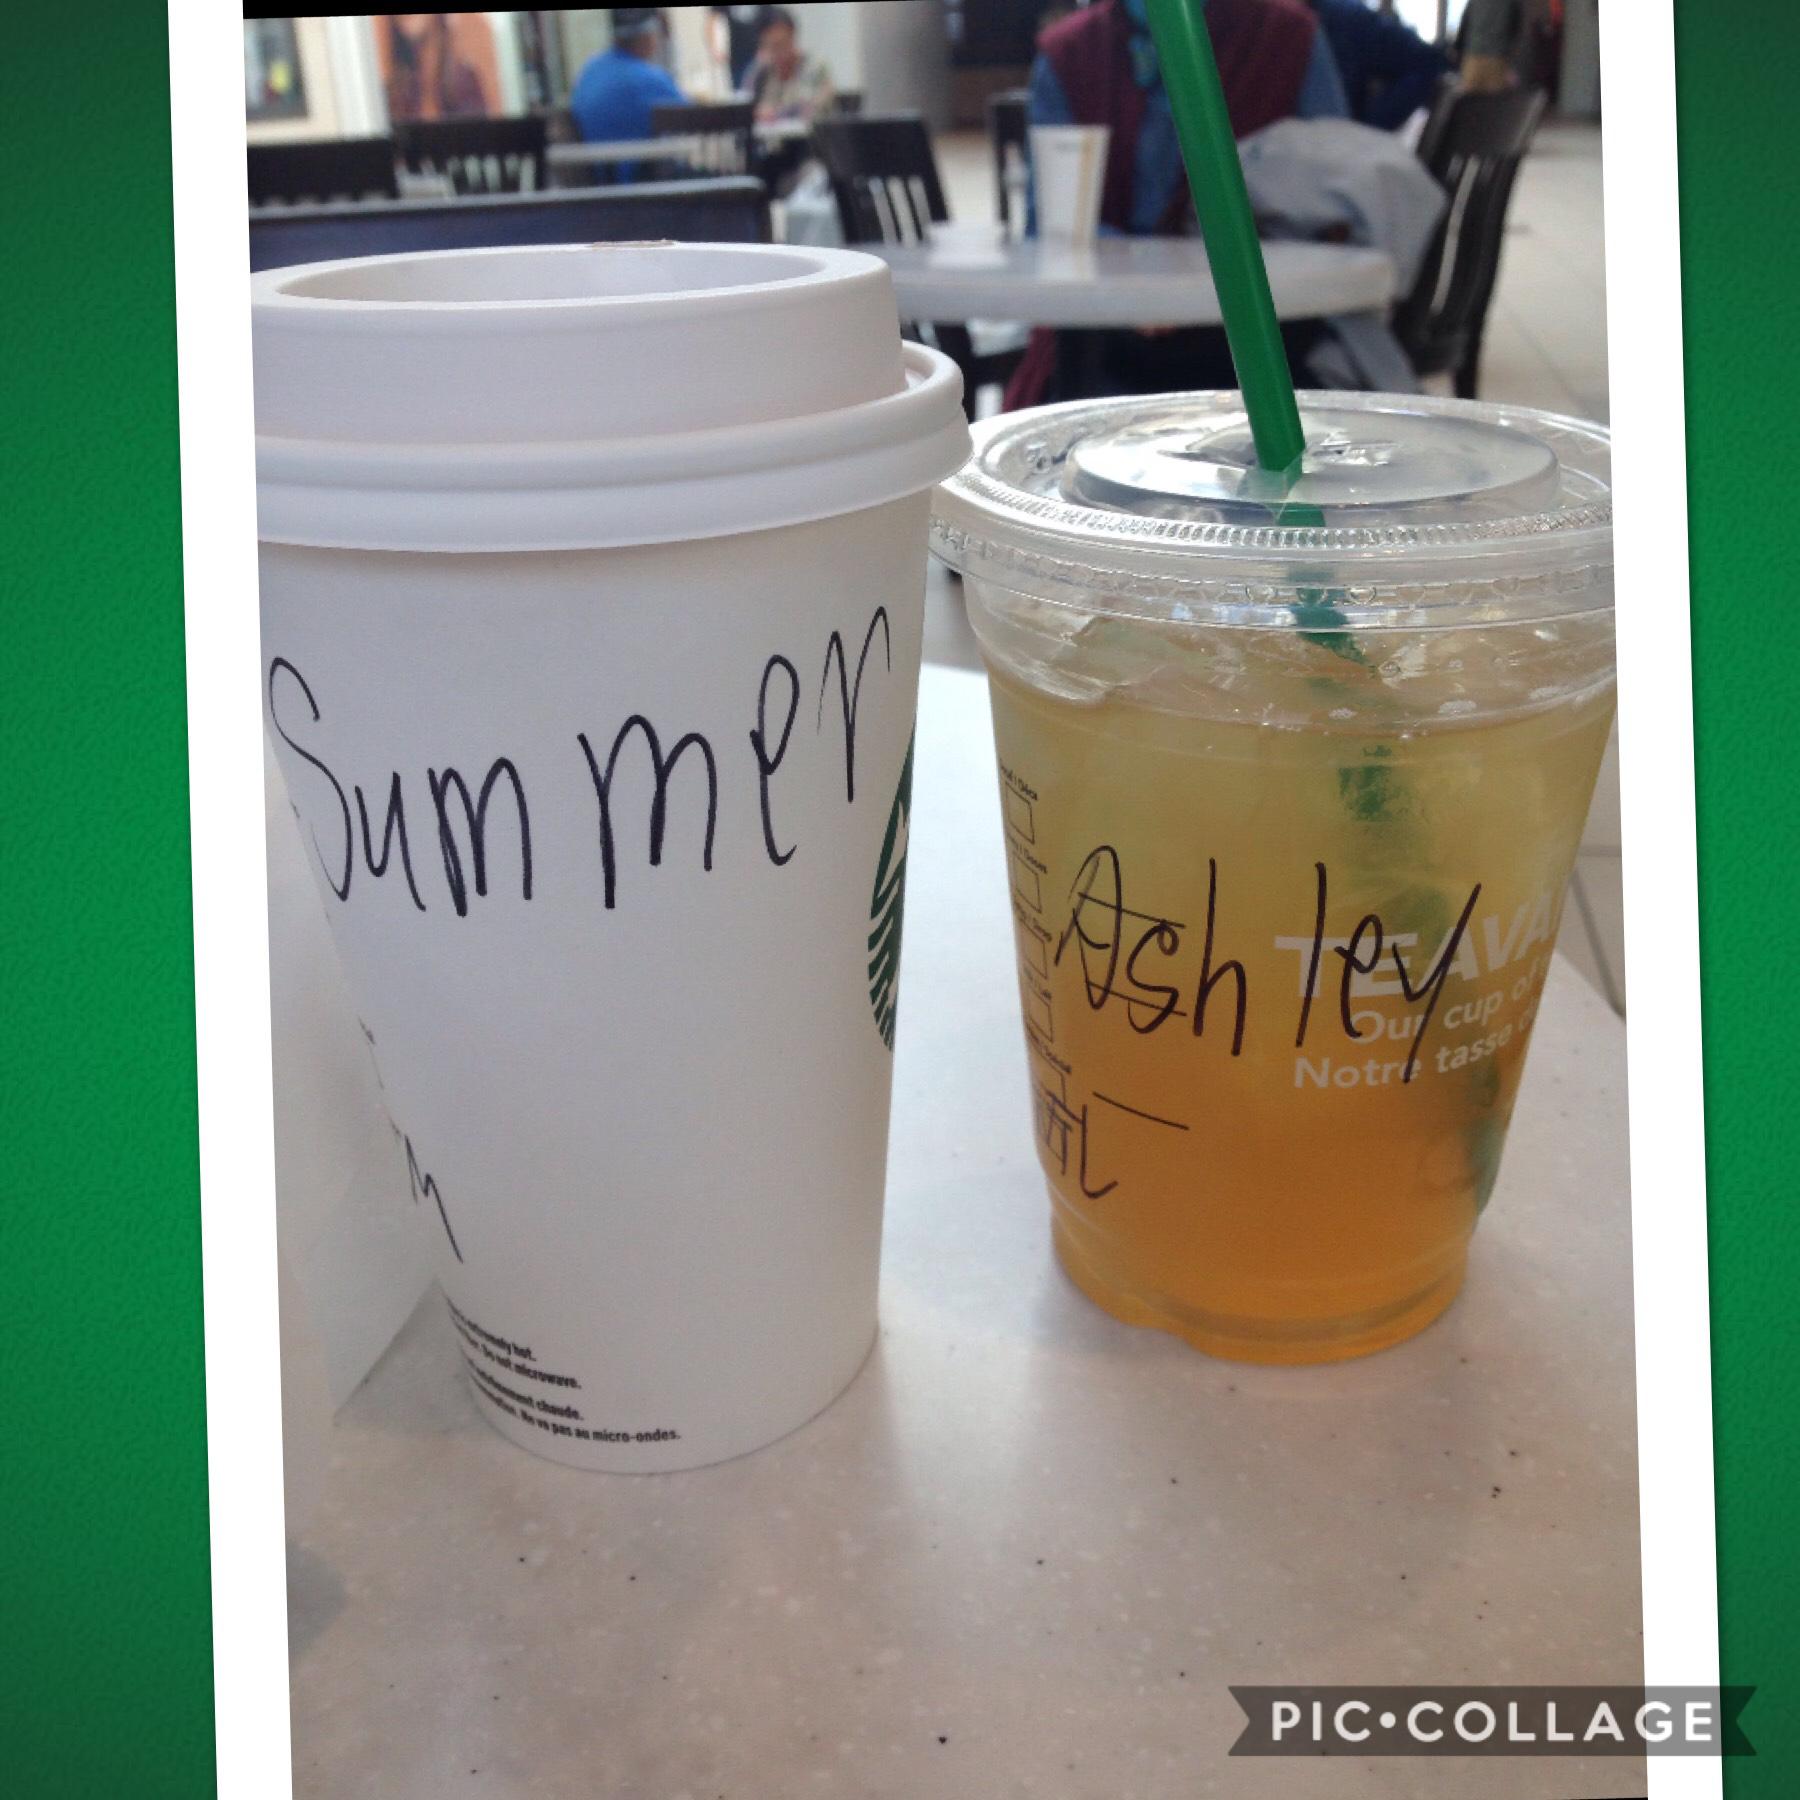 When me and my friend went to Starbucks we put fake names